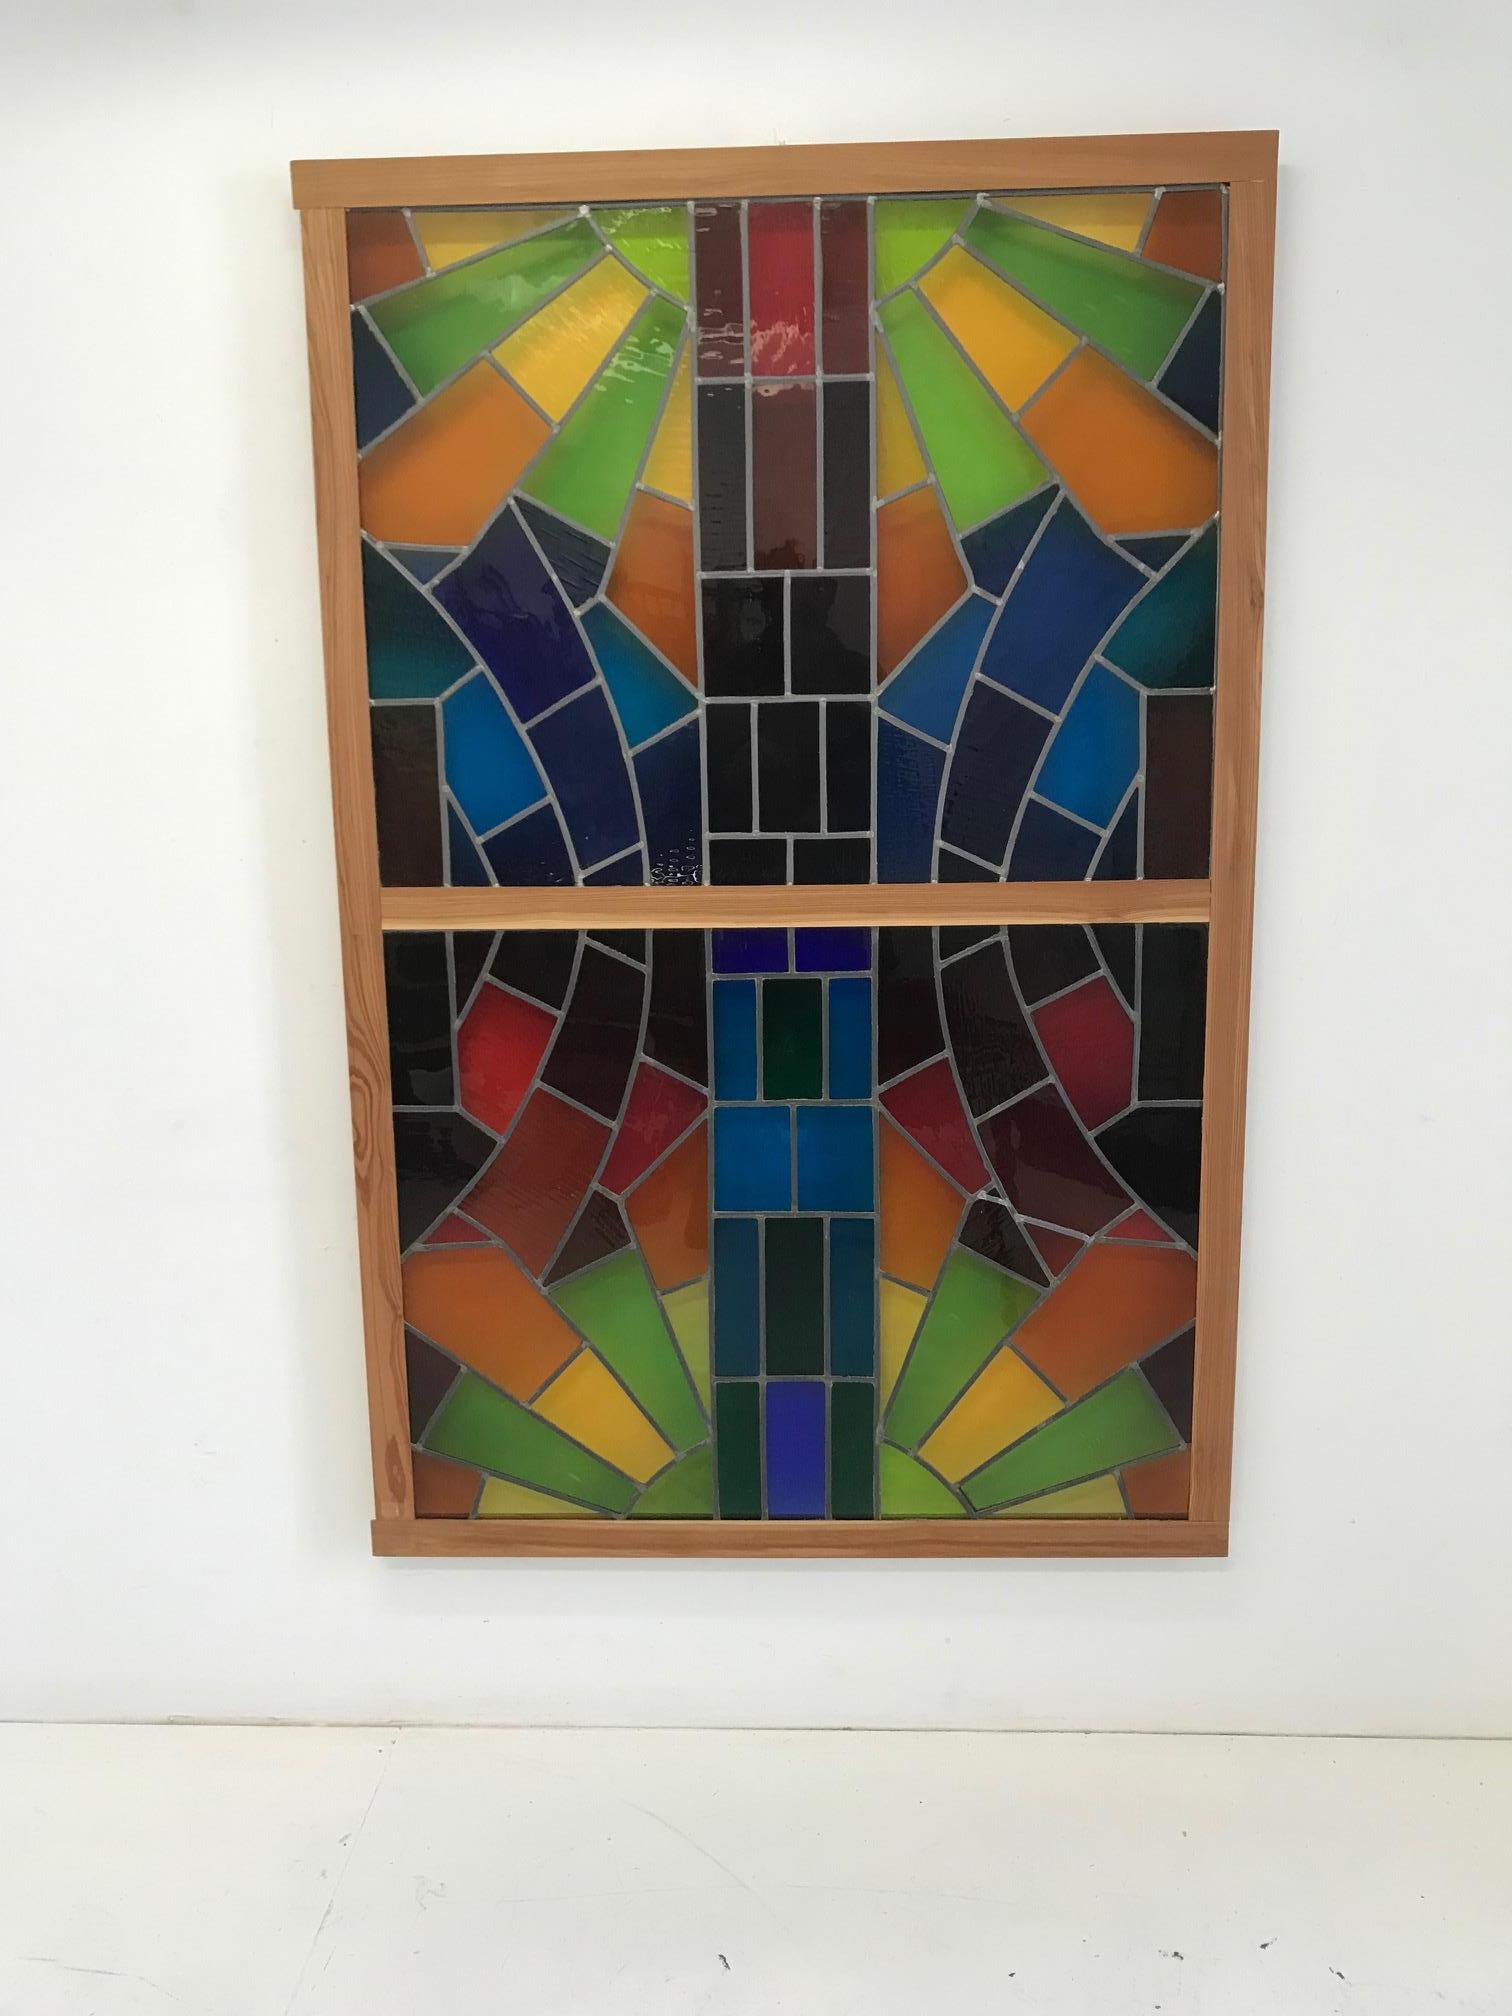 Large stained glass window with geometric multi-color patterns.
The panel consists of 2 pieces mounted on a wooden frame
Tin technique, tiffany
In a perfect state, never installed.